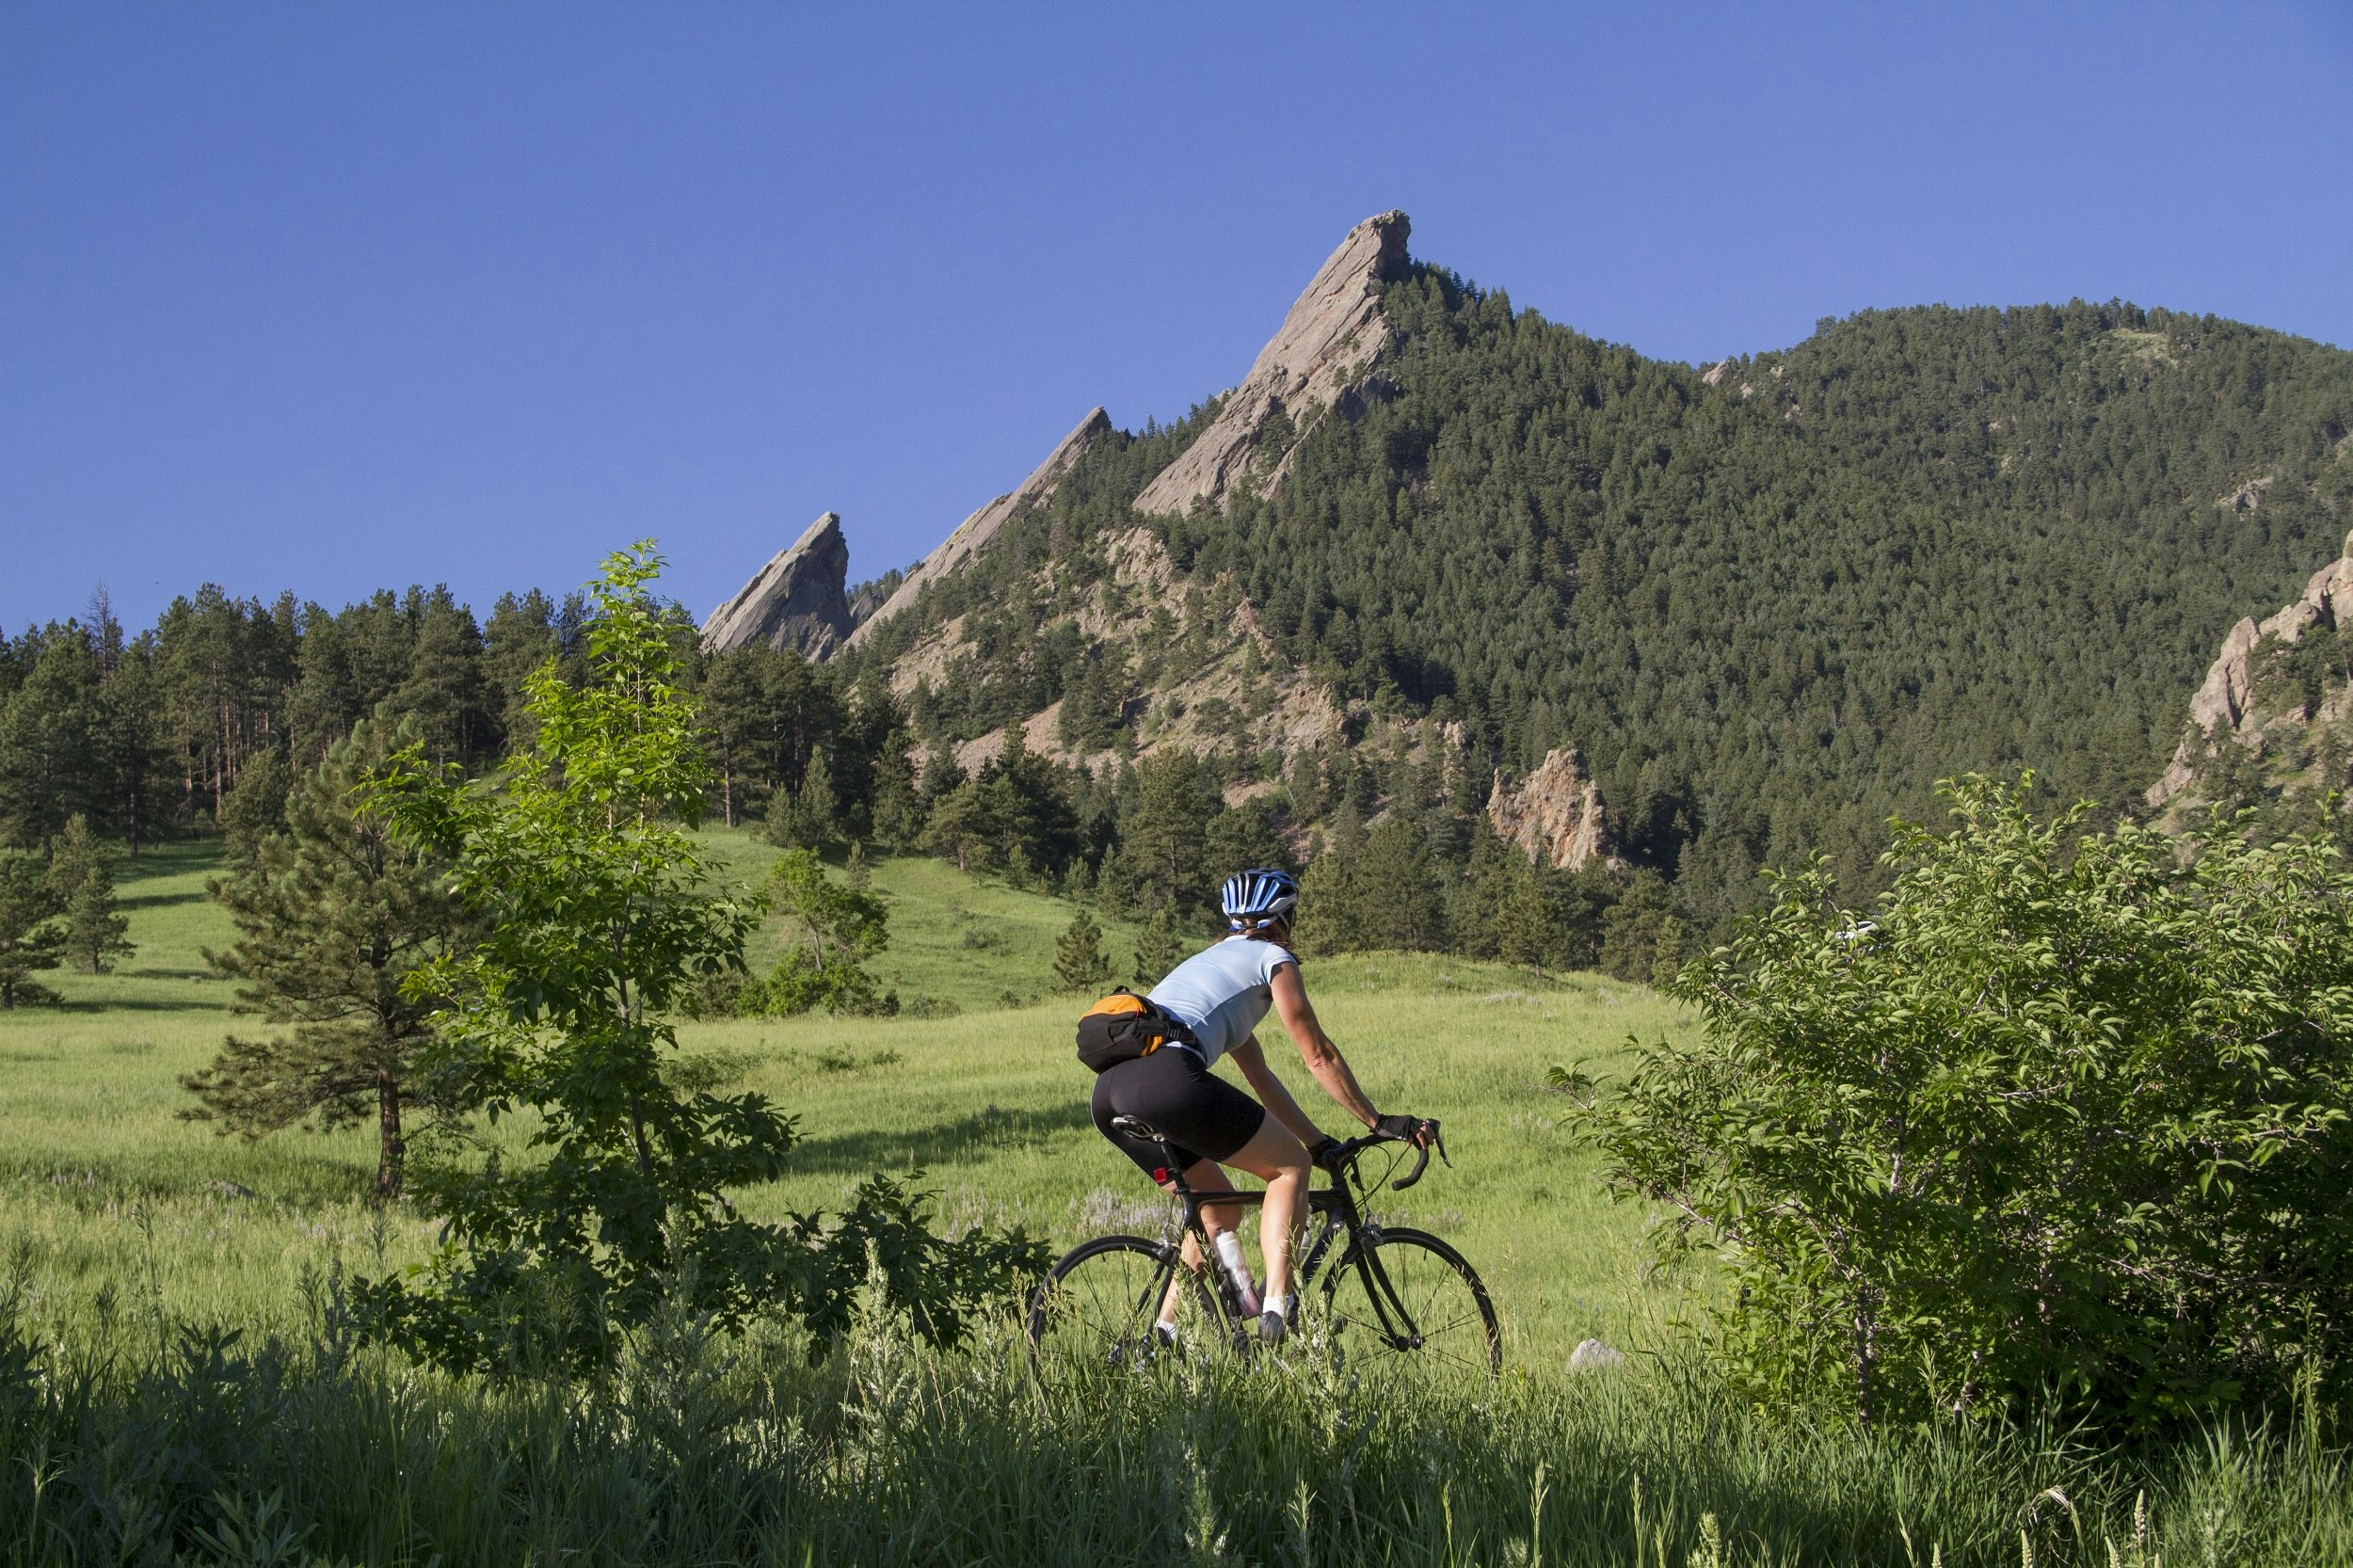 A lone cyclist pedals through rolling hills covered in grass and forest; she looks up to some rocky peaks above.